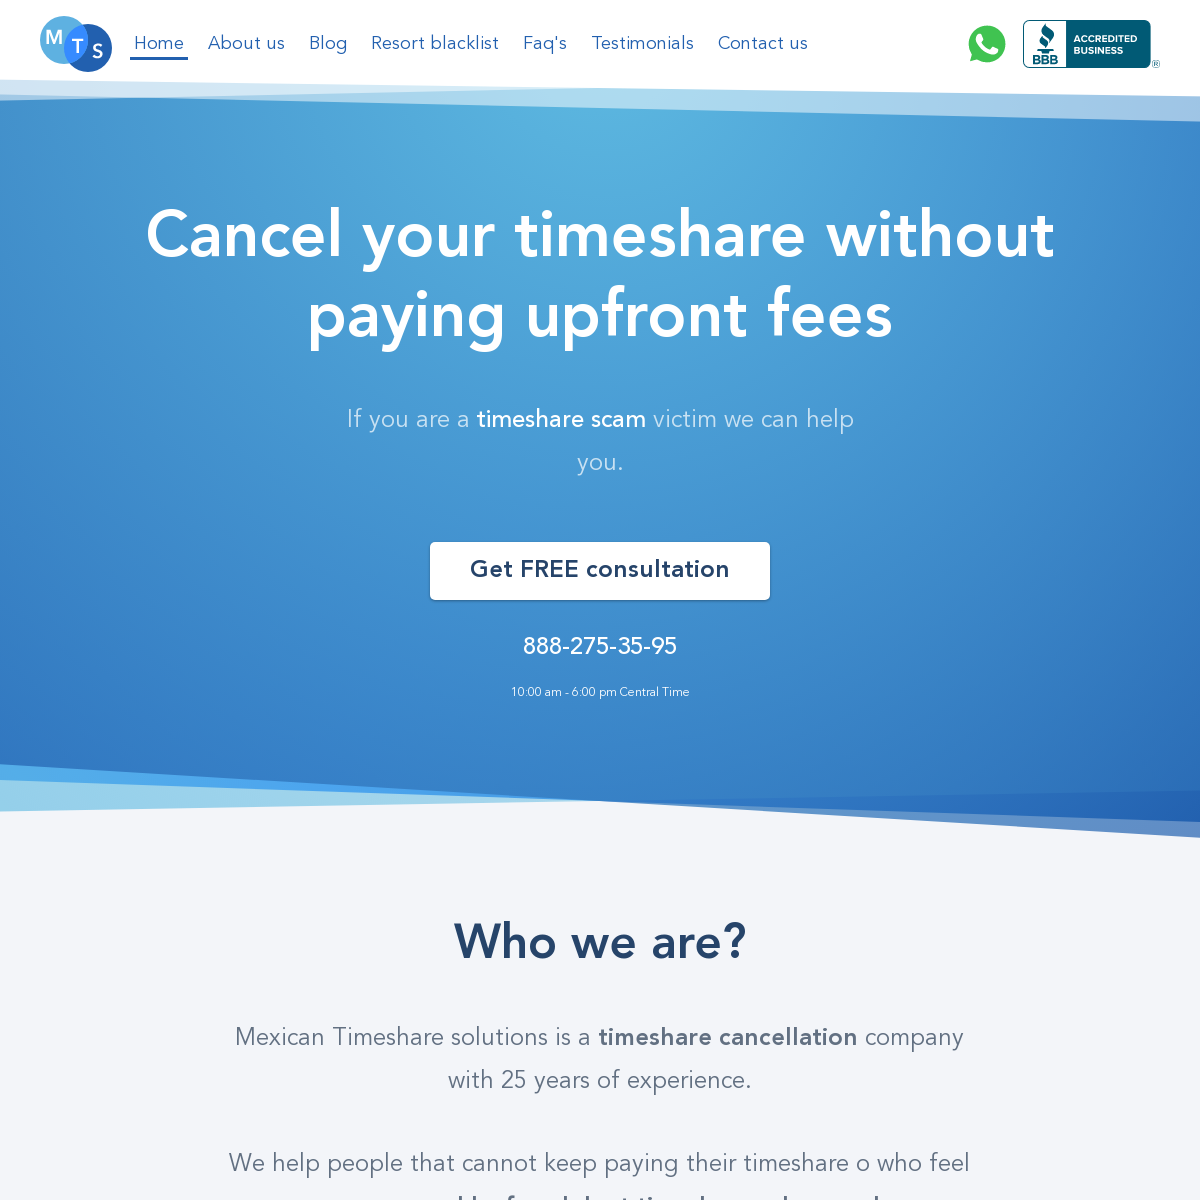 Timeshare scam- cancel your timeshare contract